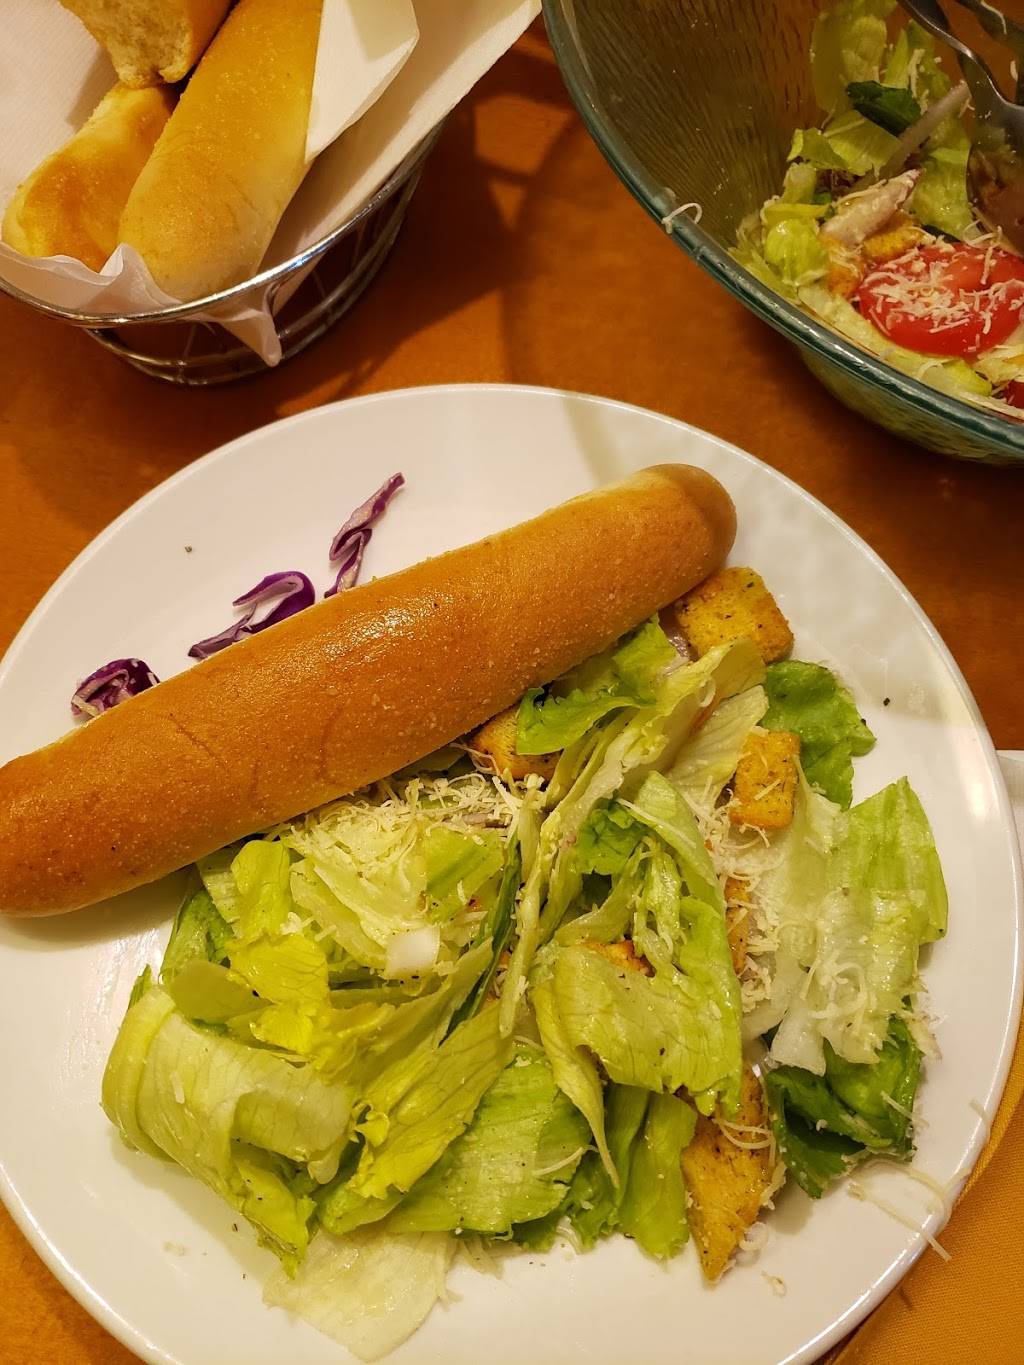 Olive Garden Italian Restaurant | meal takeaway | 6615 Airways Blvd, Southaven, MS 38671, USA | 6625363350 OR +1 662-536-3350